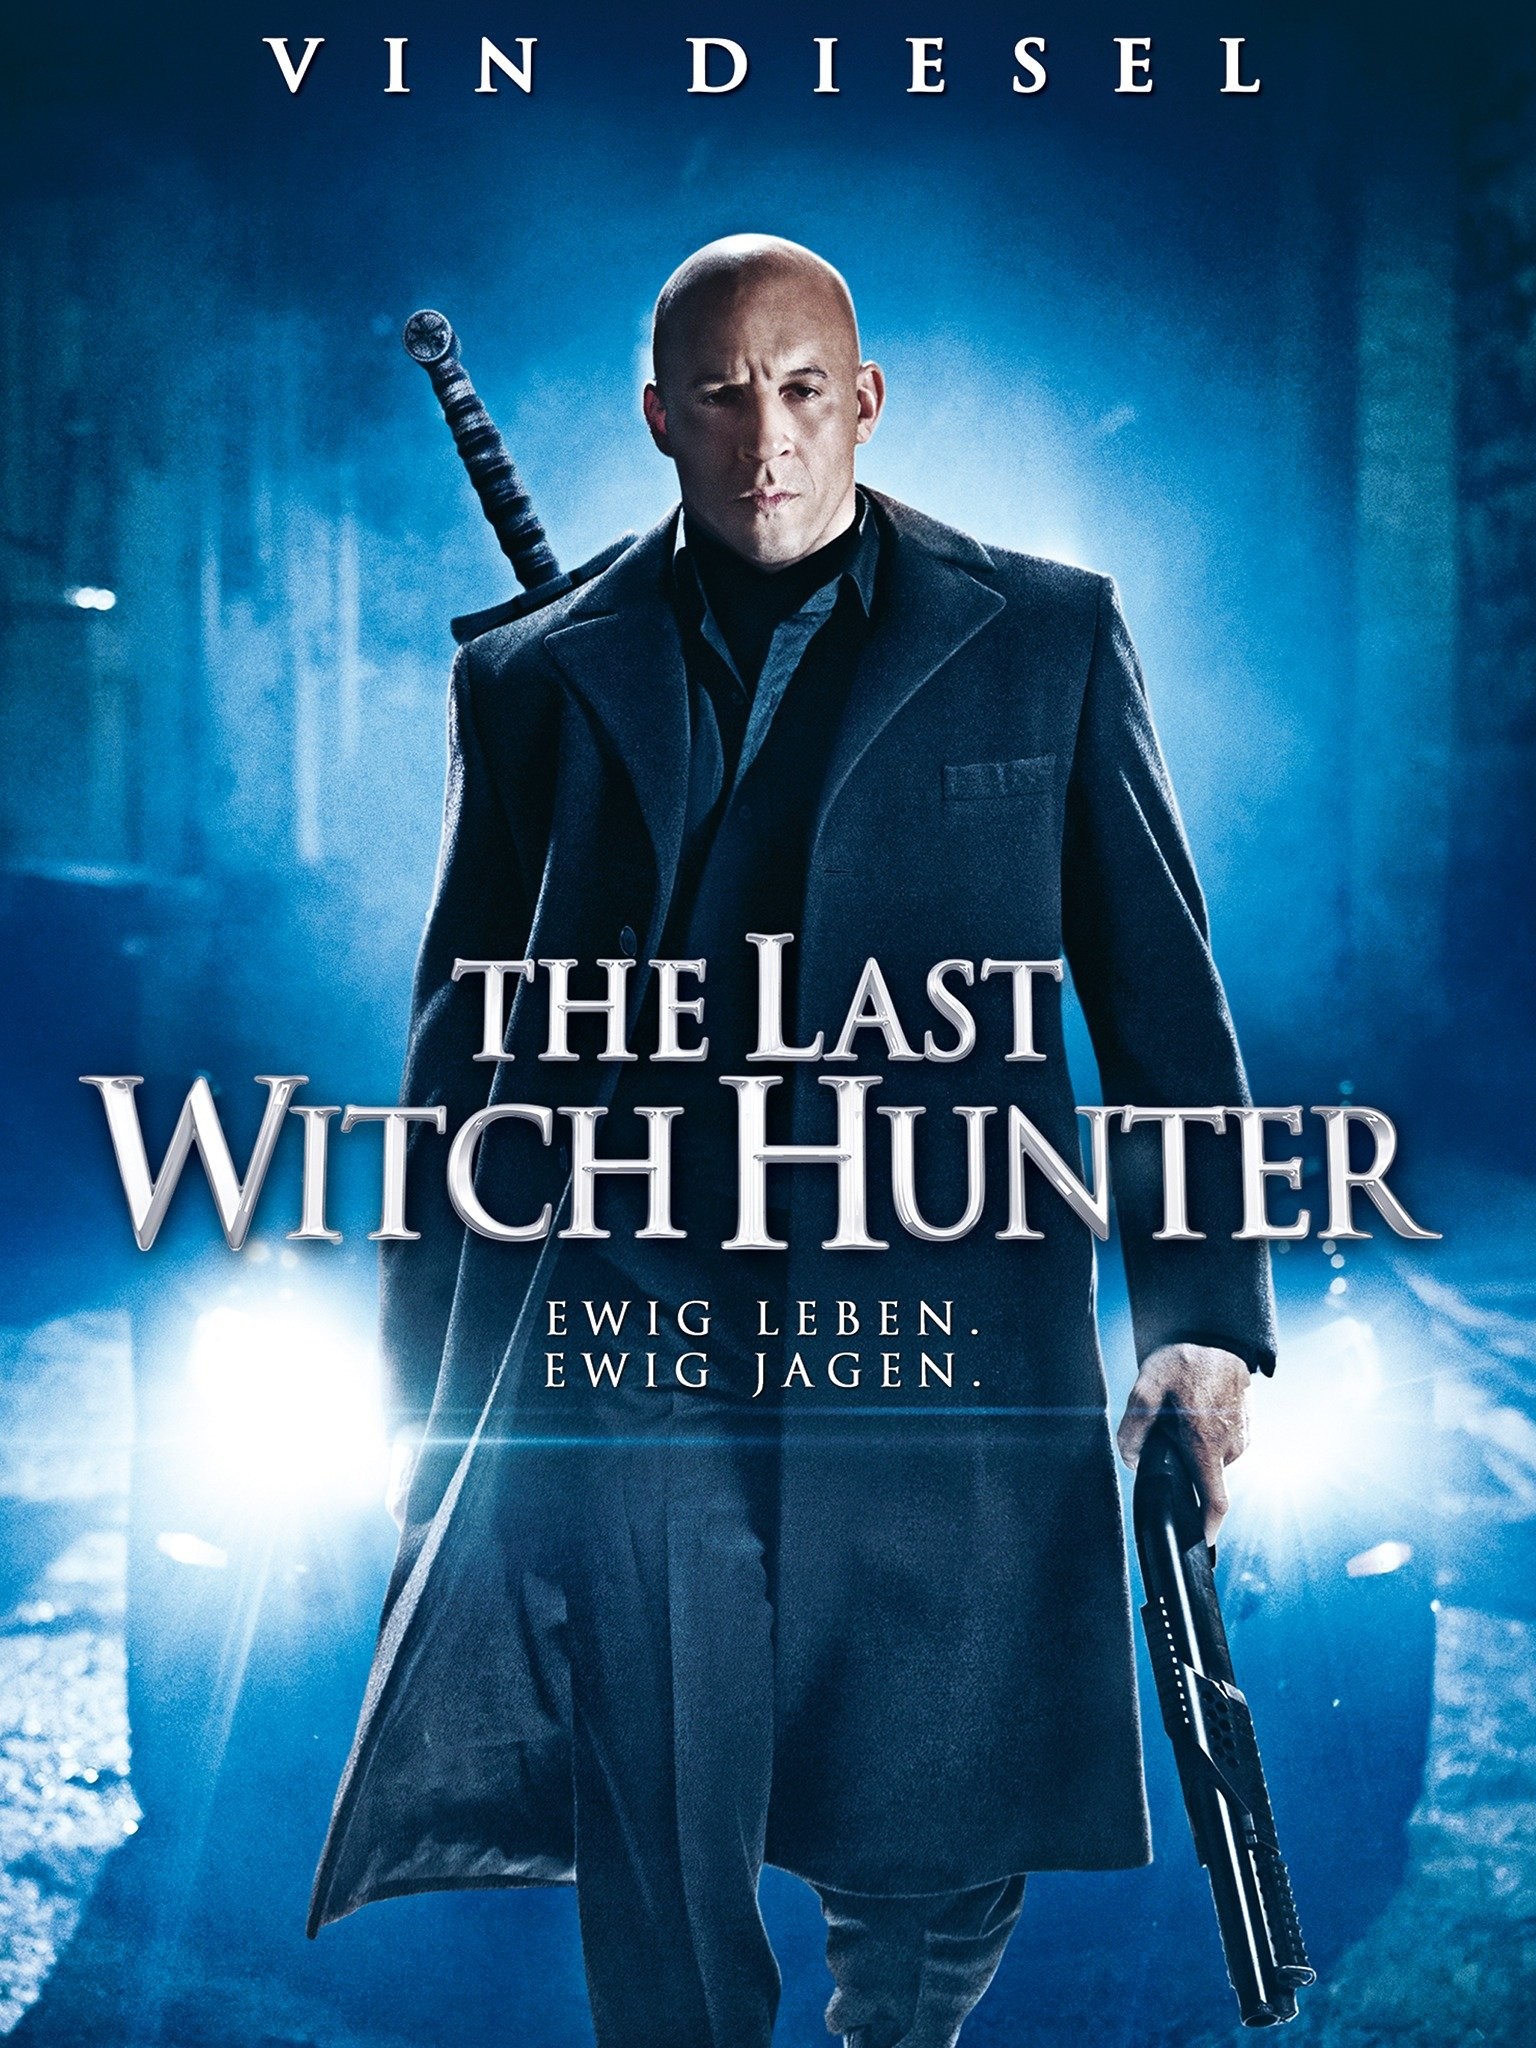 The Last Witch Hunter - Rotten Tomatoes